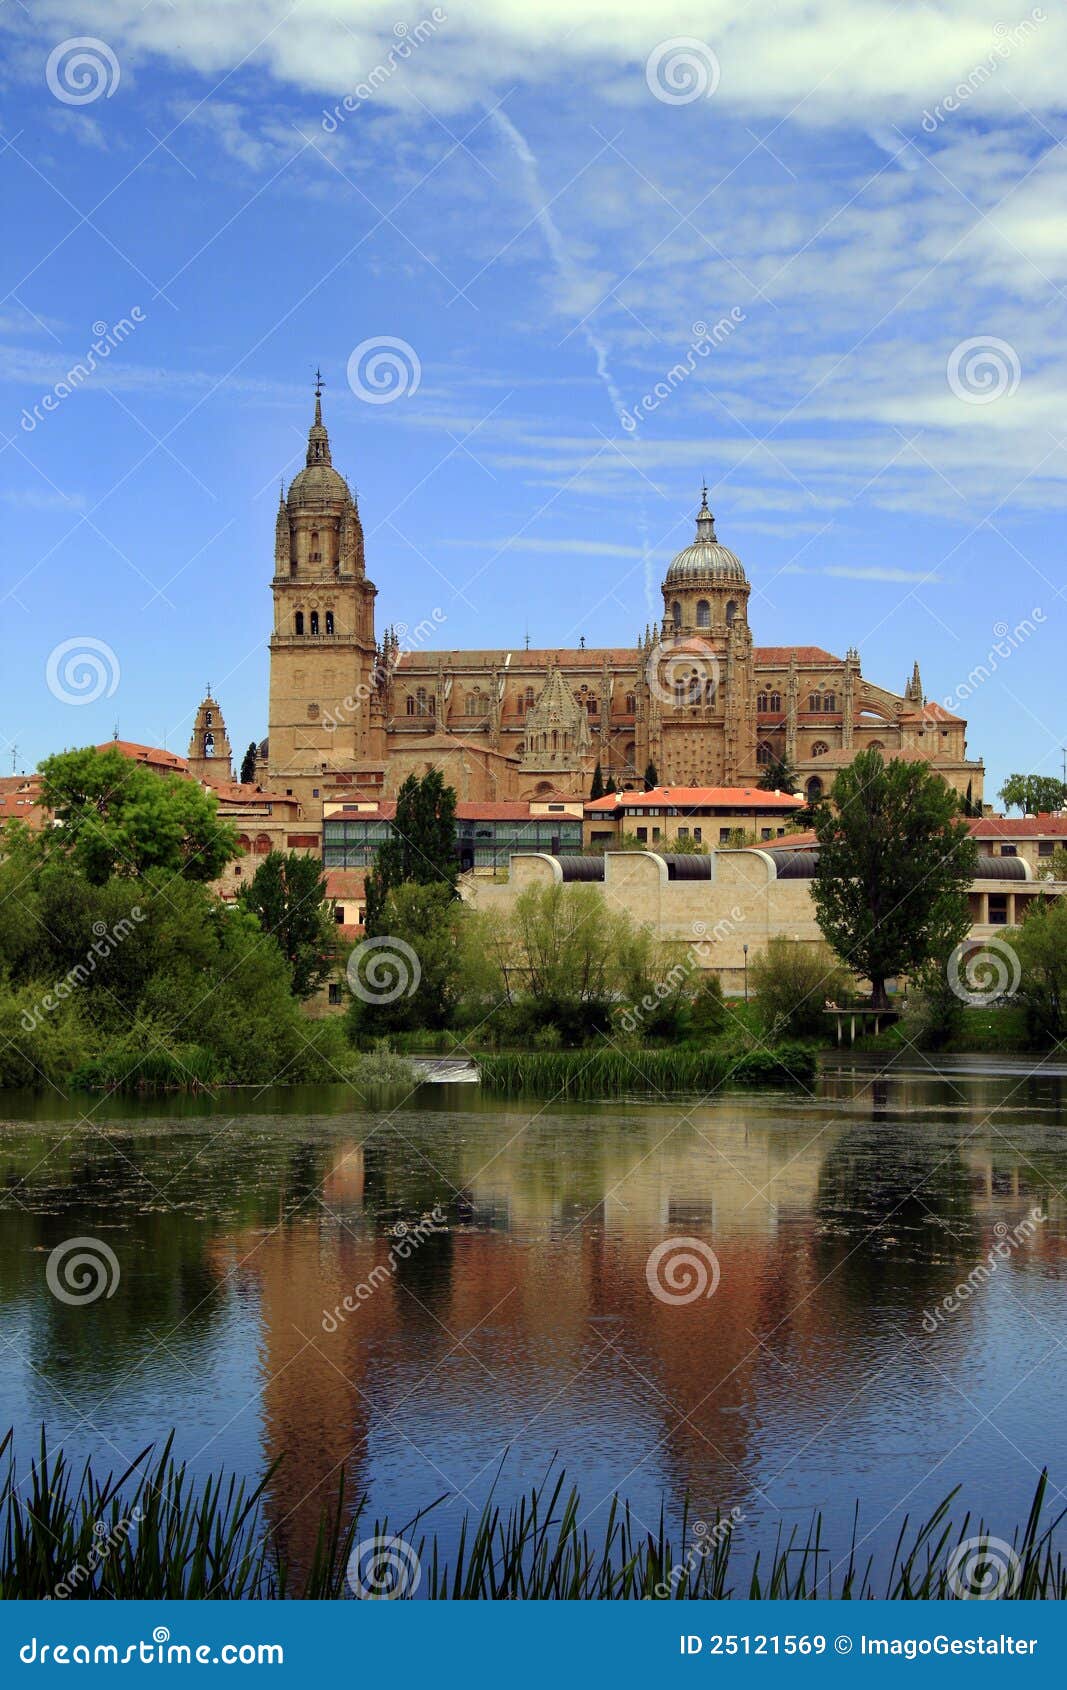 salamanca cathedral - view from the river